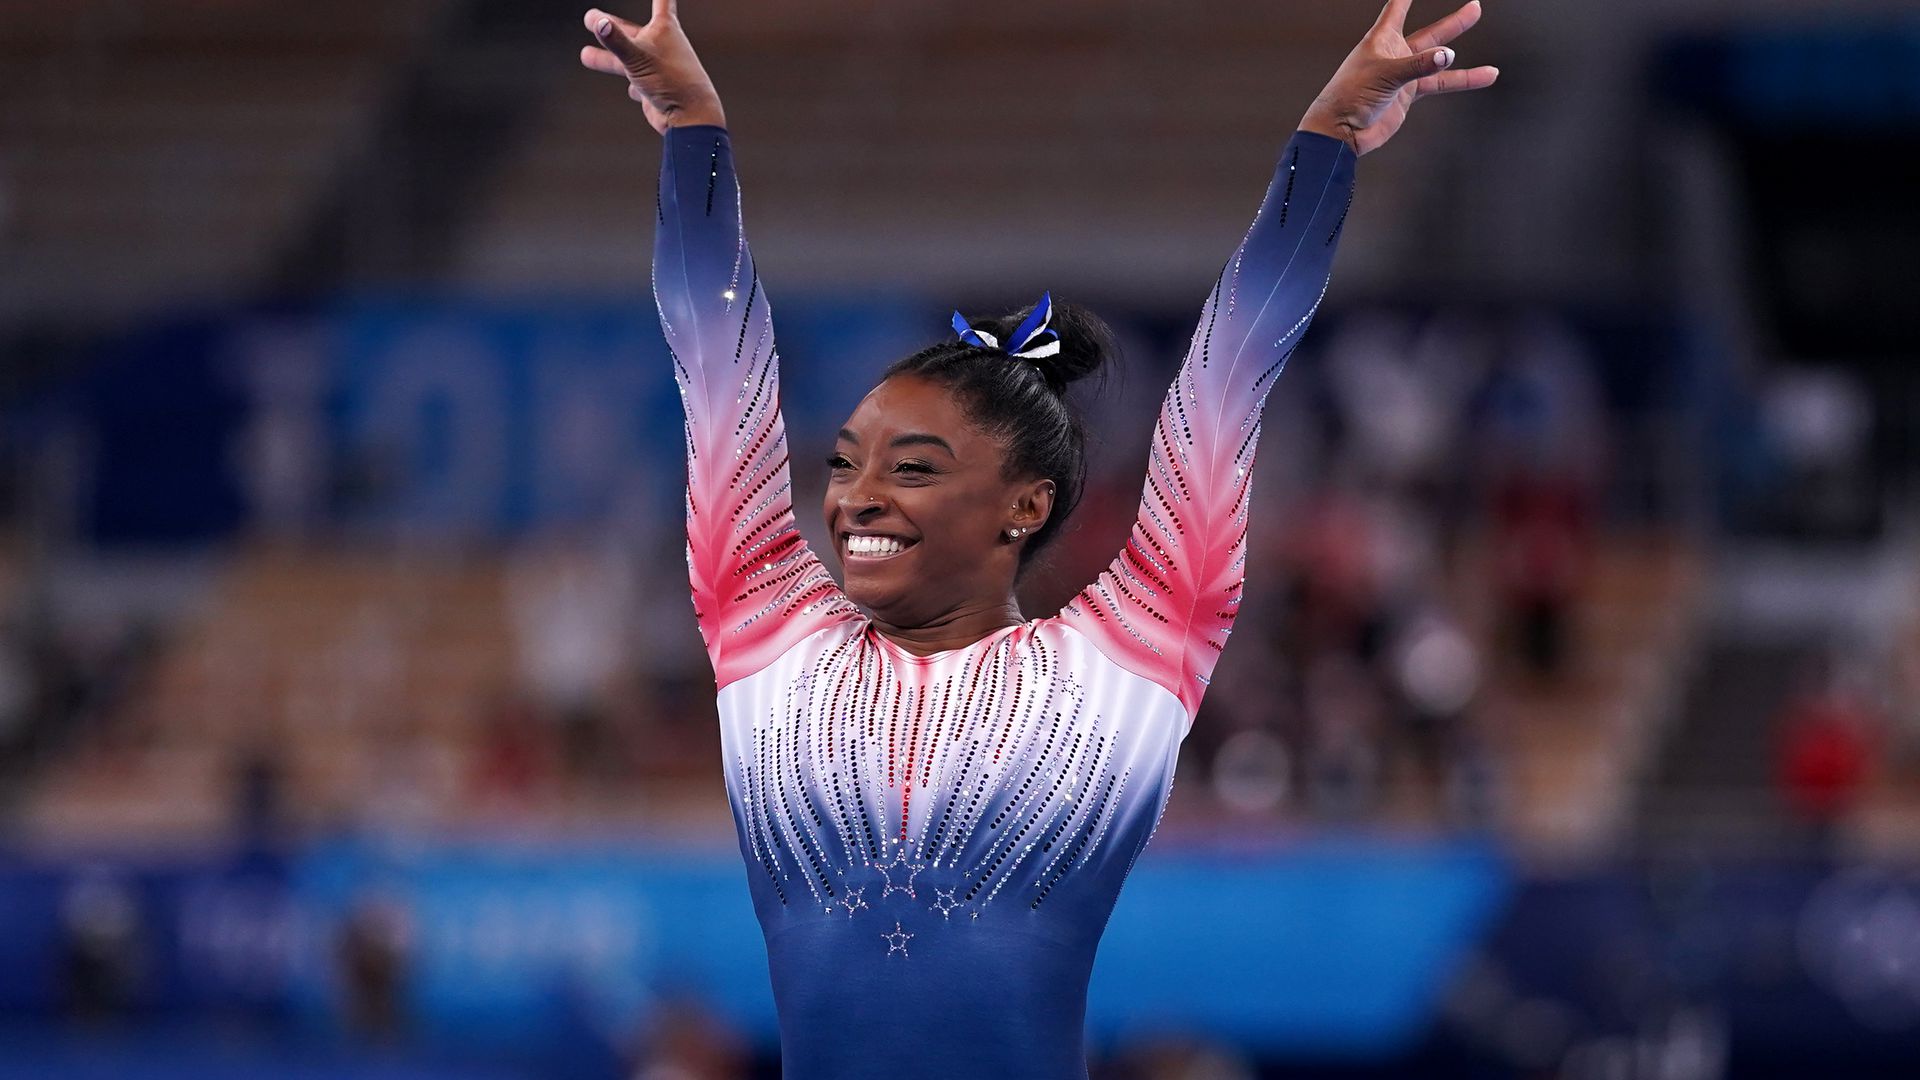 Olympics: The medals Simone Biles won in Tokyo